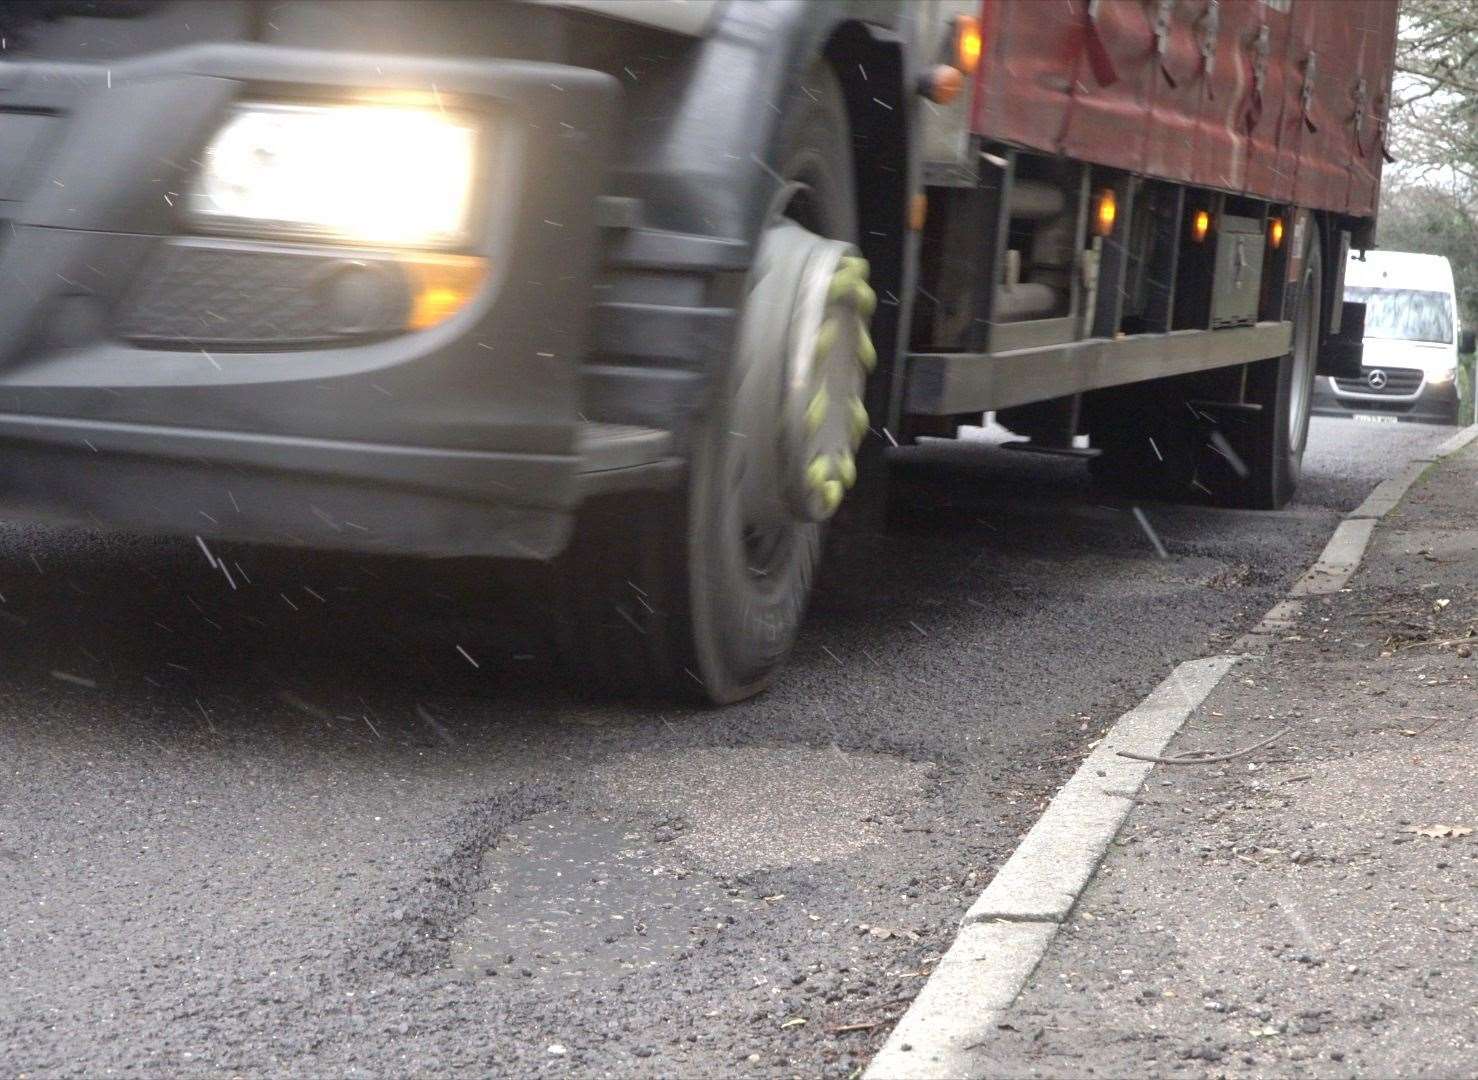 The road is often used by HGVs which Cllr Ward says has a negative impact on existing potholes